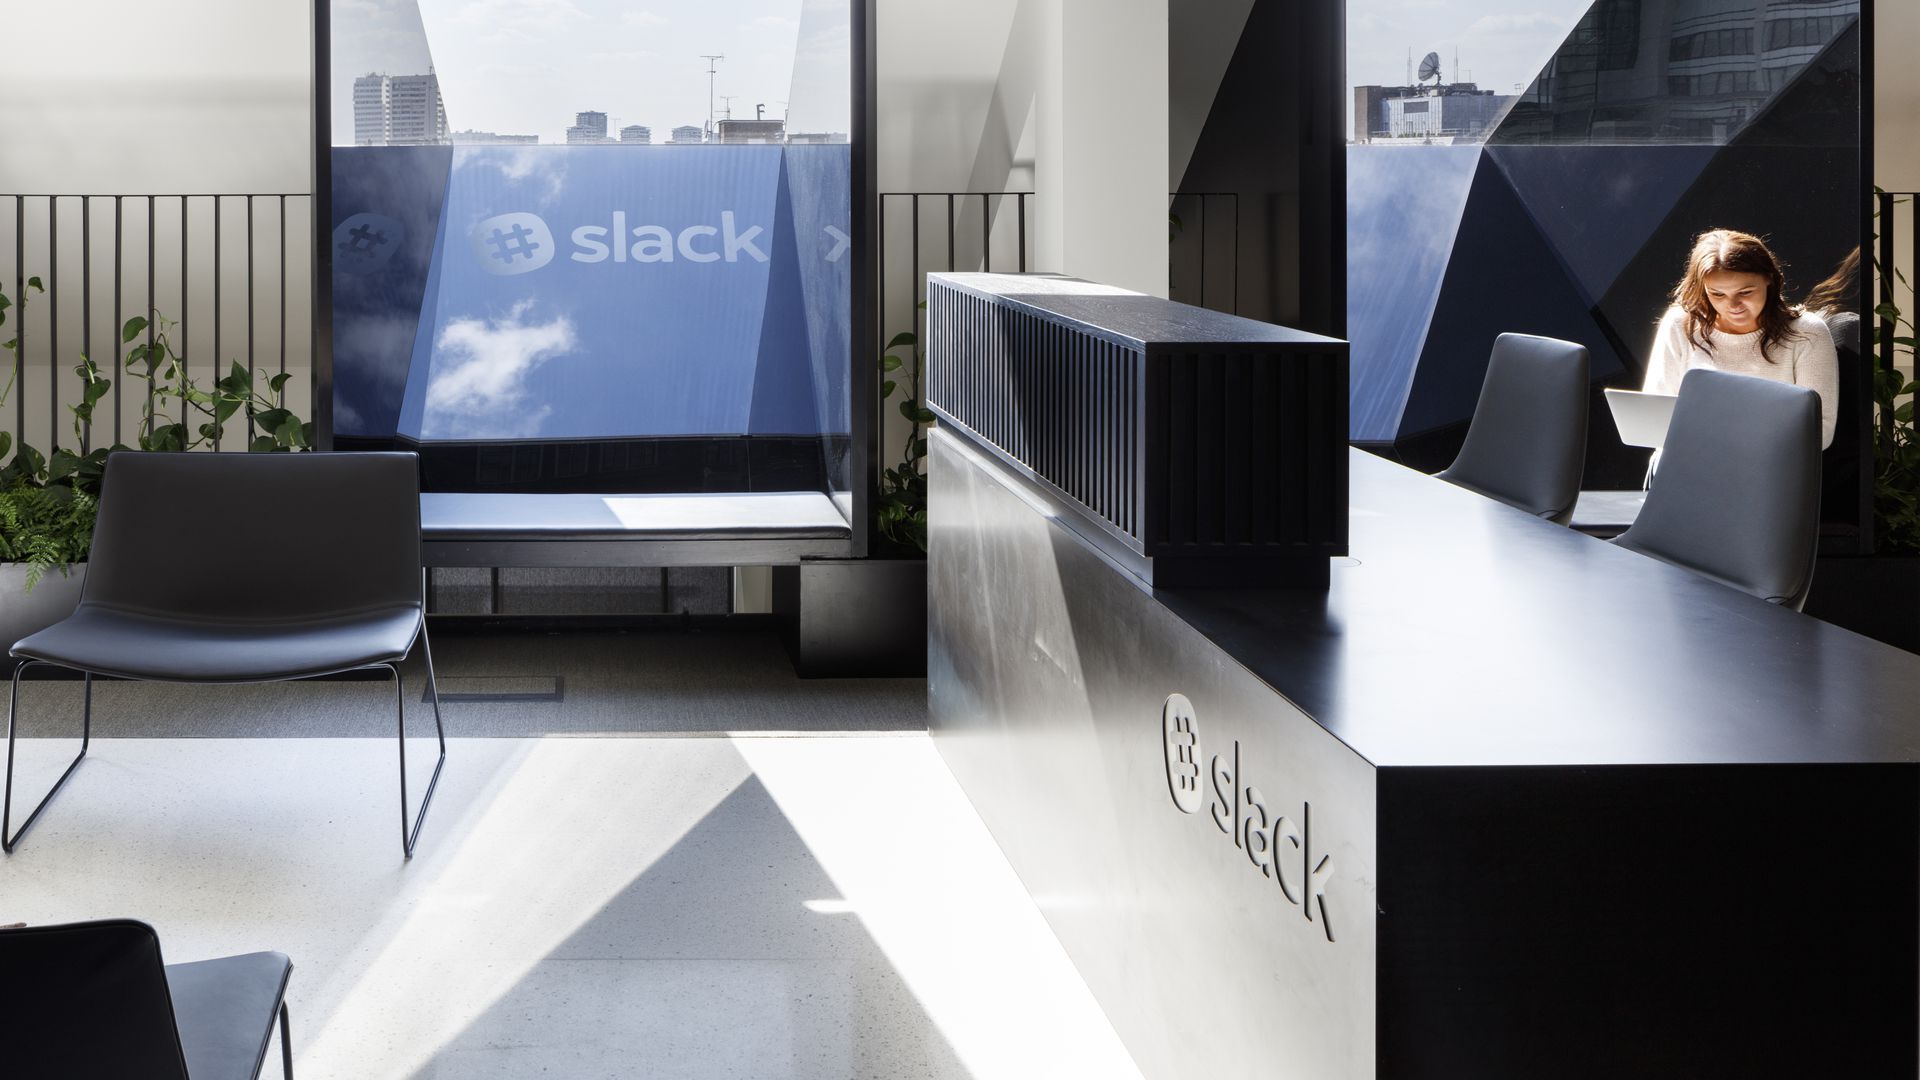 Office lobby of Slack. With woman sitting at a desk and a TV on. 